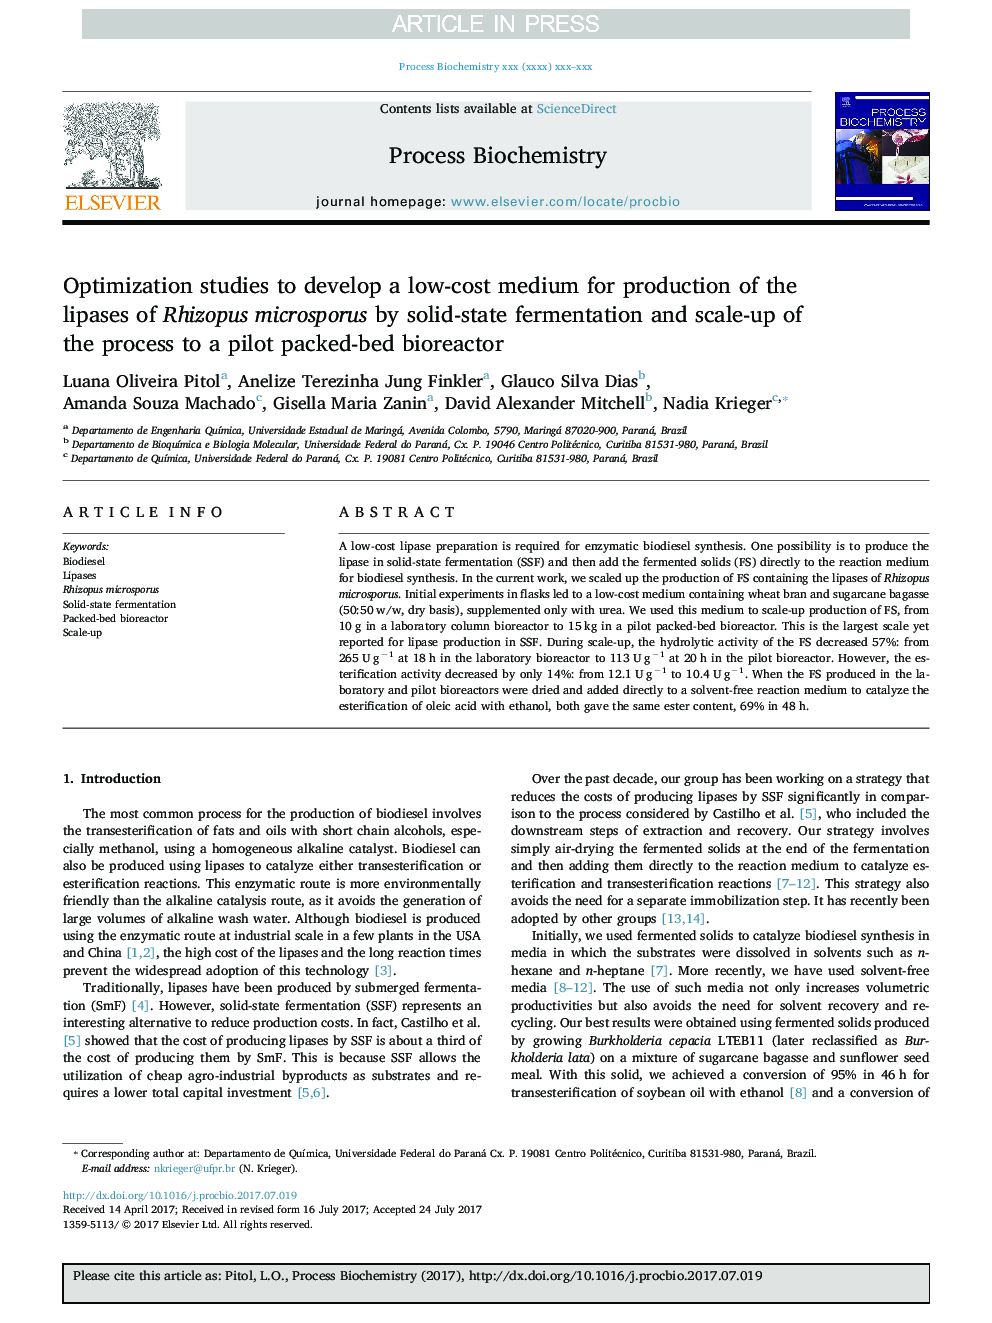 Optimization studies to develop a low-cost medium for production of the lipases of Rhizopus microsporus by solid-state fermentation and scale-up of the process to a pilot packed-bed bioreactor